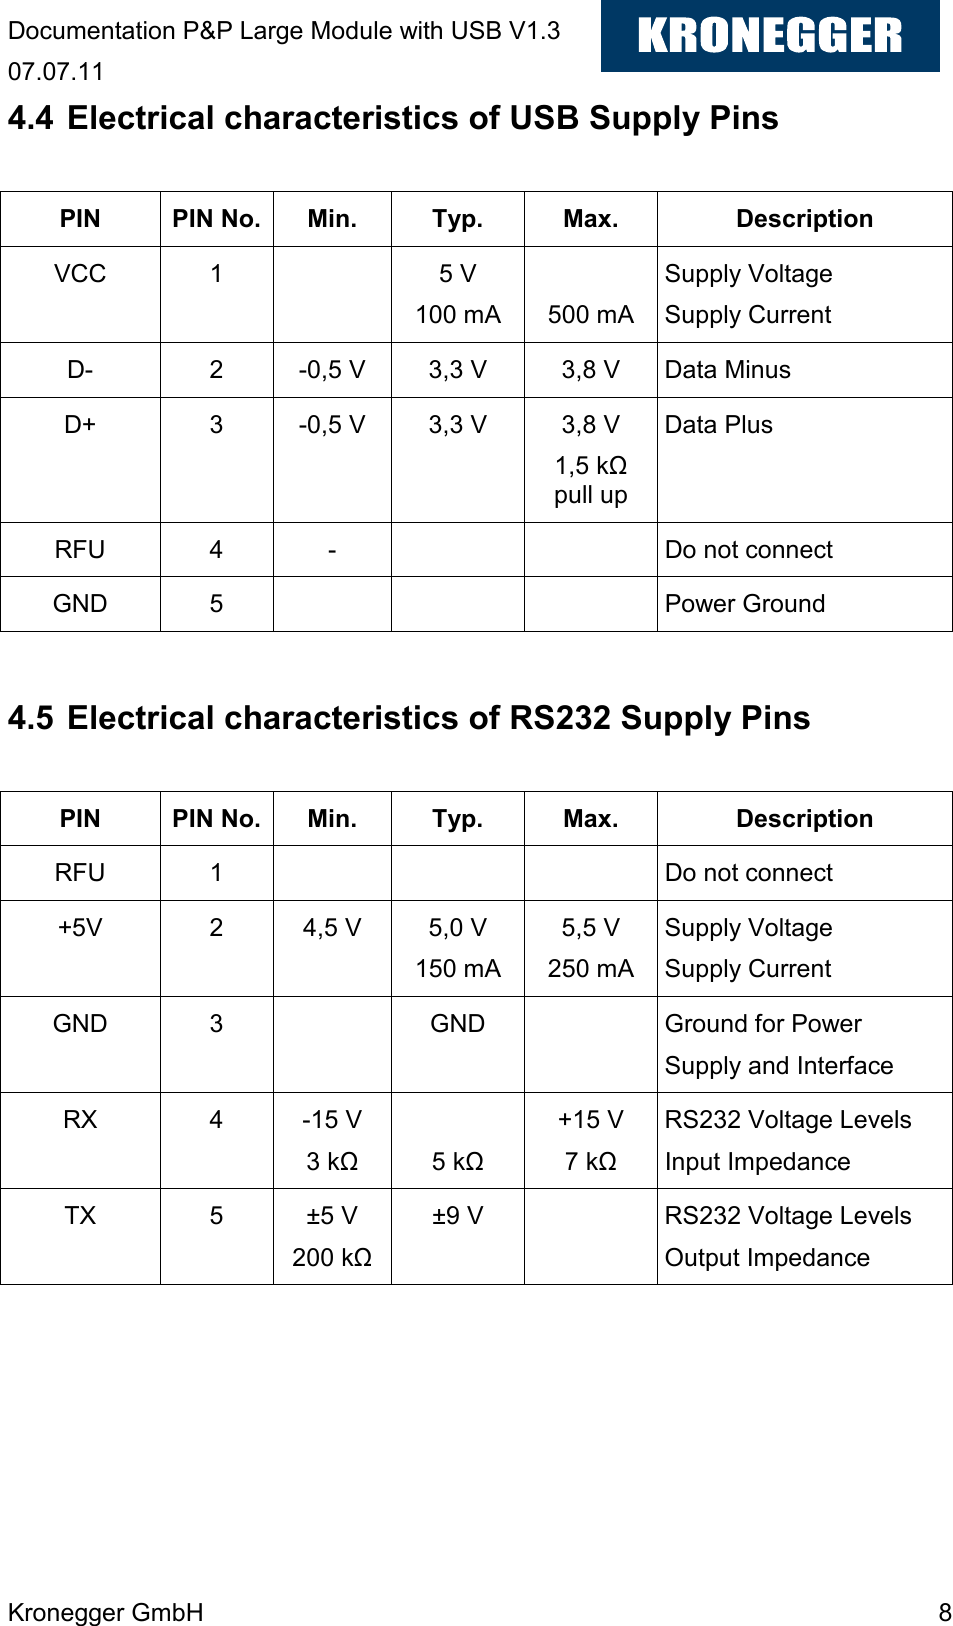 Documentation P&amp;P Large Module with USB V1.3 07.07.11 Kronegger GmbH    8 4.4 Electrical characteristics of USB Supply Pins  PIN  PIN No. Min.  Typ.  Max.  Description VCC  1    5 V 100 mA  500 mA Supply Voltage Supply Current D-  2  -0,5 V  3,3 V  3,8 V  Data Minus D+  3  -0,5 V  3,3 V  3,8 V 1,5 kΩ pull up Data Plus RFU  4  -      Do not connect GND  5        Power Ground  4.5 Electrical characteristics of RS232 Supply Pins  PIN  PIN No. Min.  Typ.  Max.  Description RFU  1        Do not connect +5V  2  4,5 V  5,0 V 150 mA 5,5 V 250 mA Supply Voltage Supply Current GND  3    GND    Ground for Power Supply and Interface RX  4  -15 V 3 kΩ  5 kΩ +15 V 7 kΩ RS232 Voltage Levels Input Impedance TX  5  ±5 V 200 kΩ ±9 V    RS232 Voltage Levels Output Impedance        